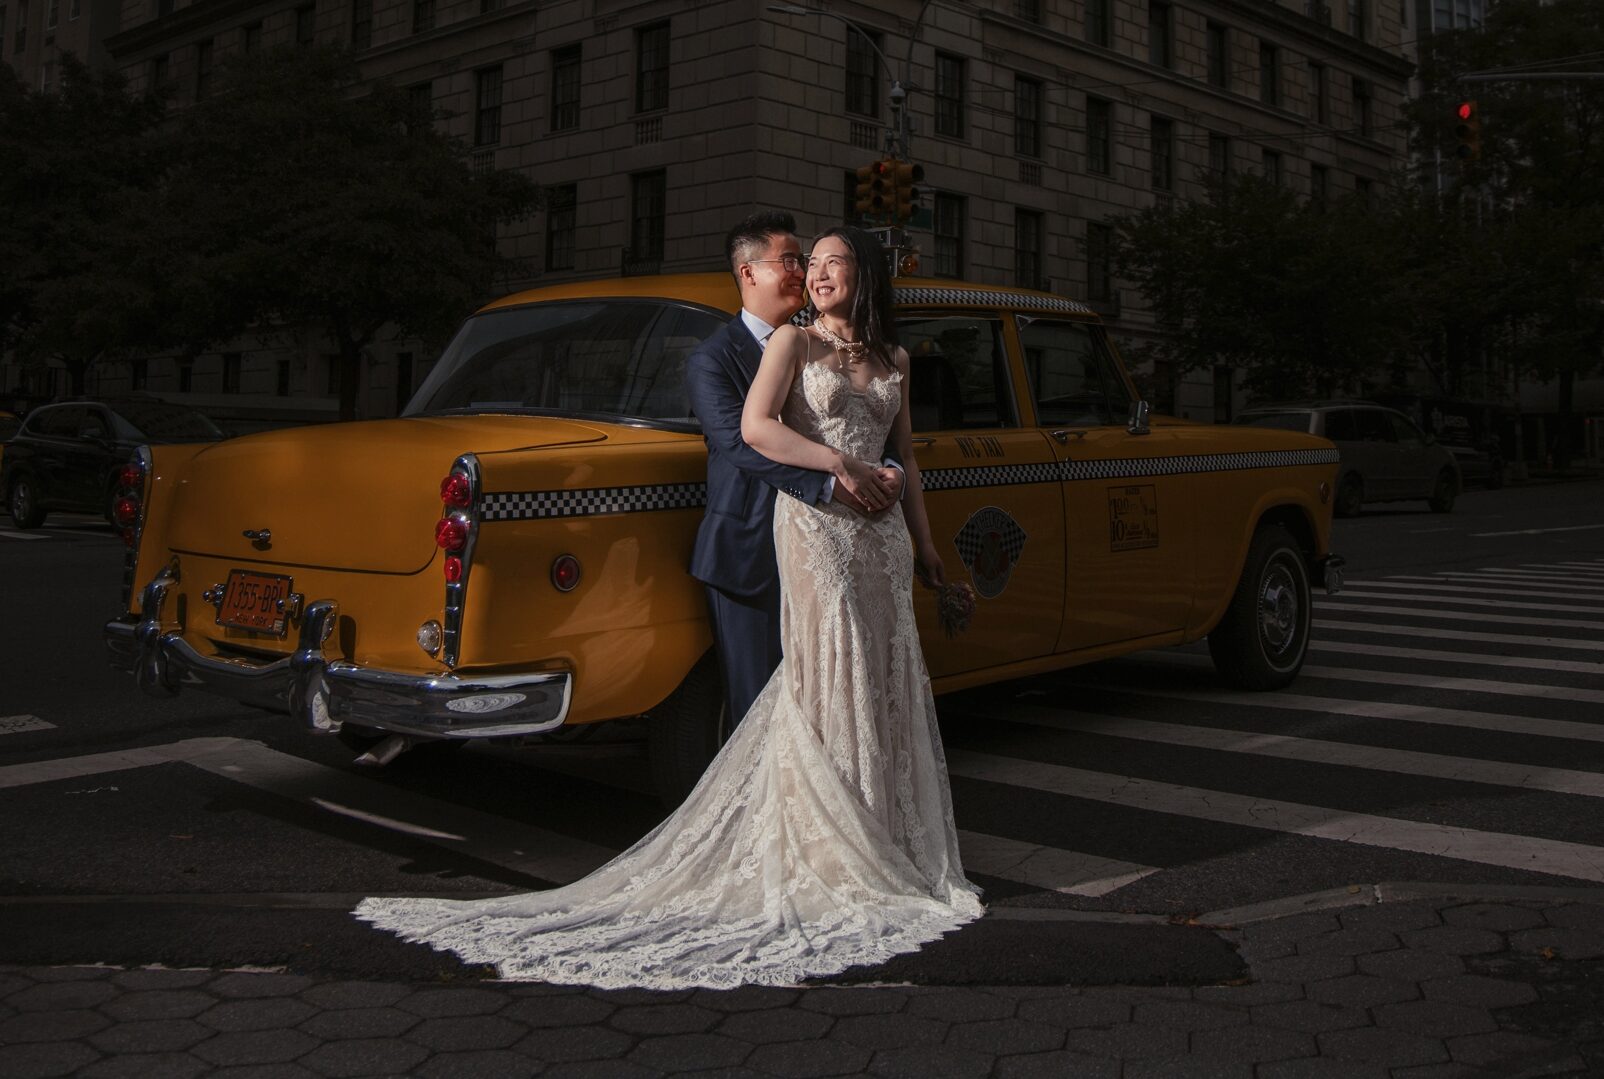 A newlywed couple poses in front of a yellow taxi in New York City on their wedding day.